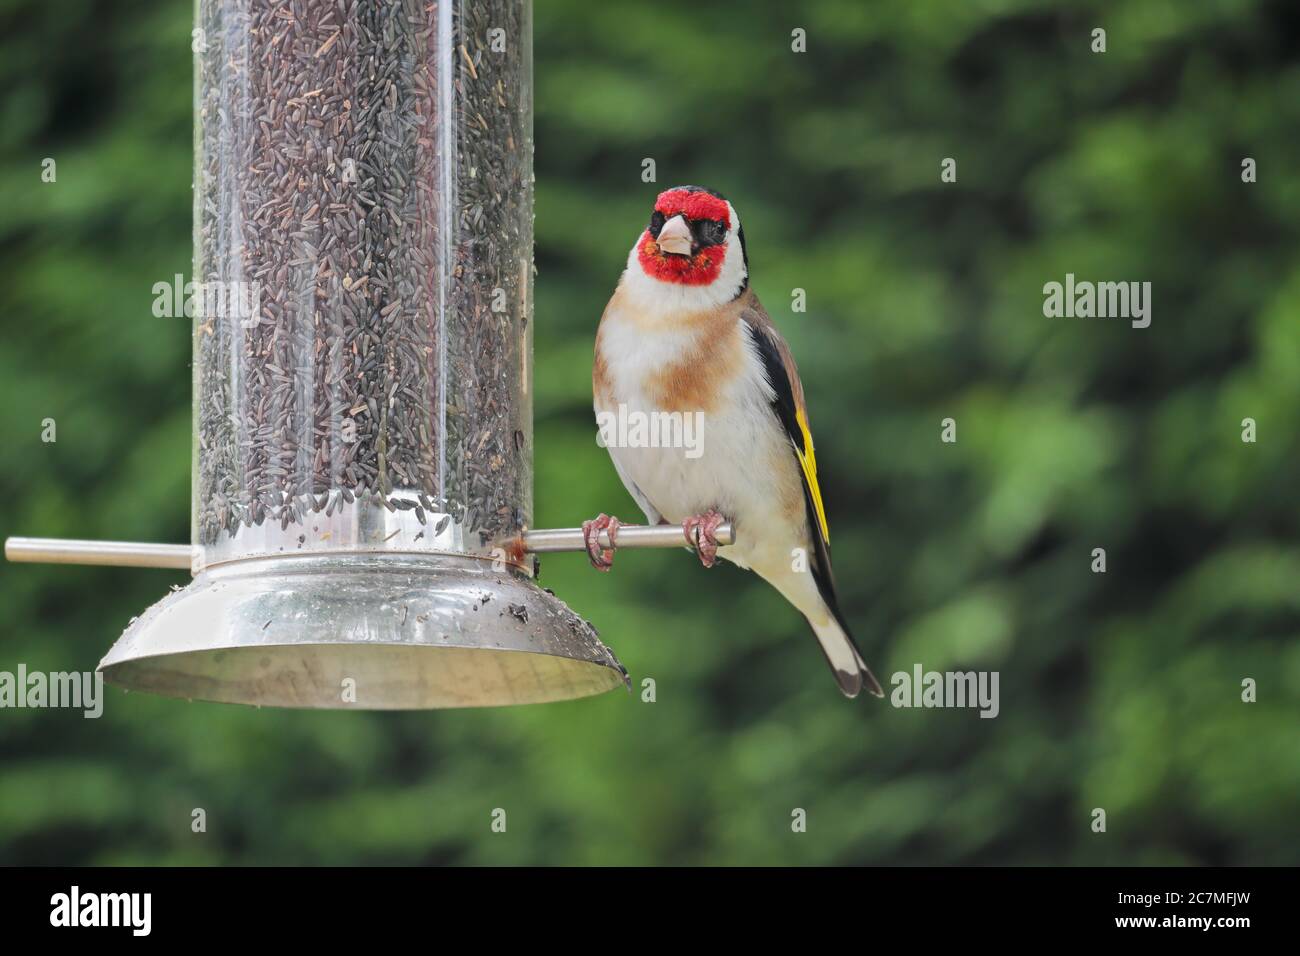 A goldfinch Carduelis carduelis perched on a nyjer seed feeder against a green background. Stock Photo